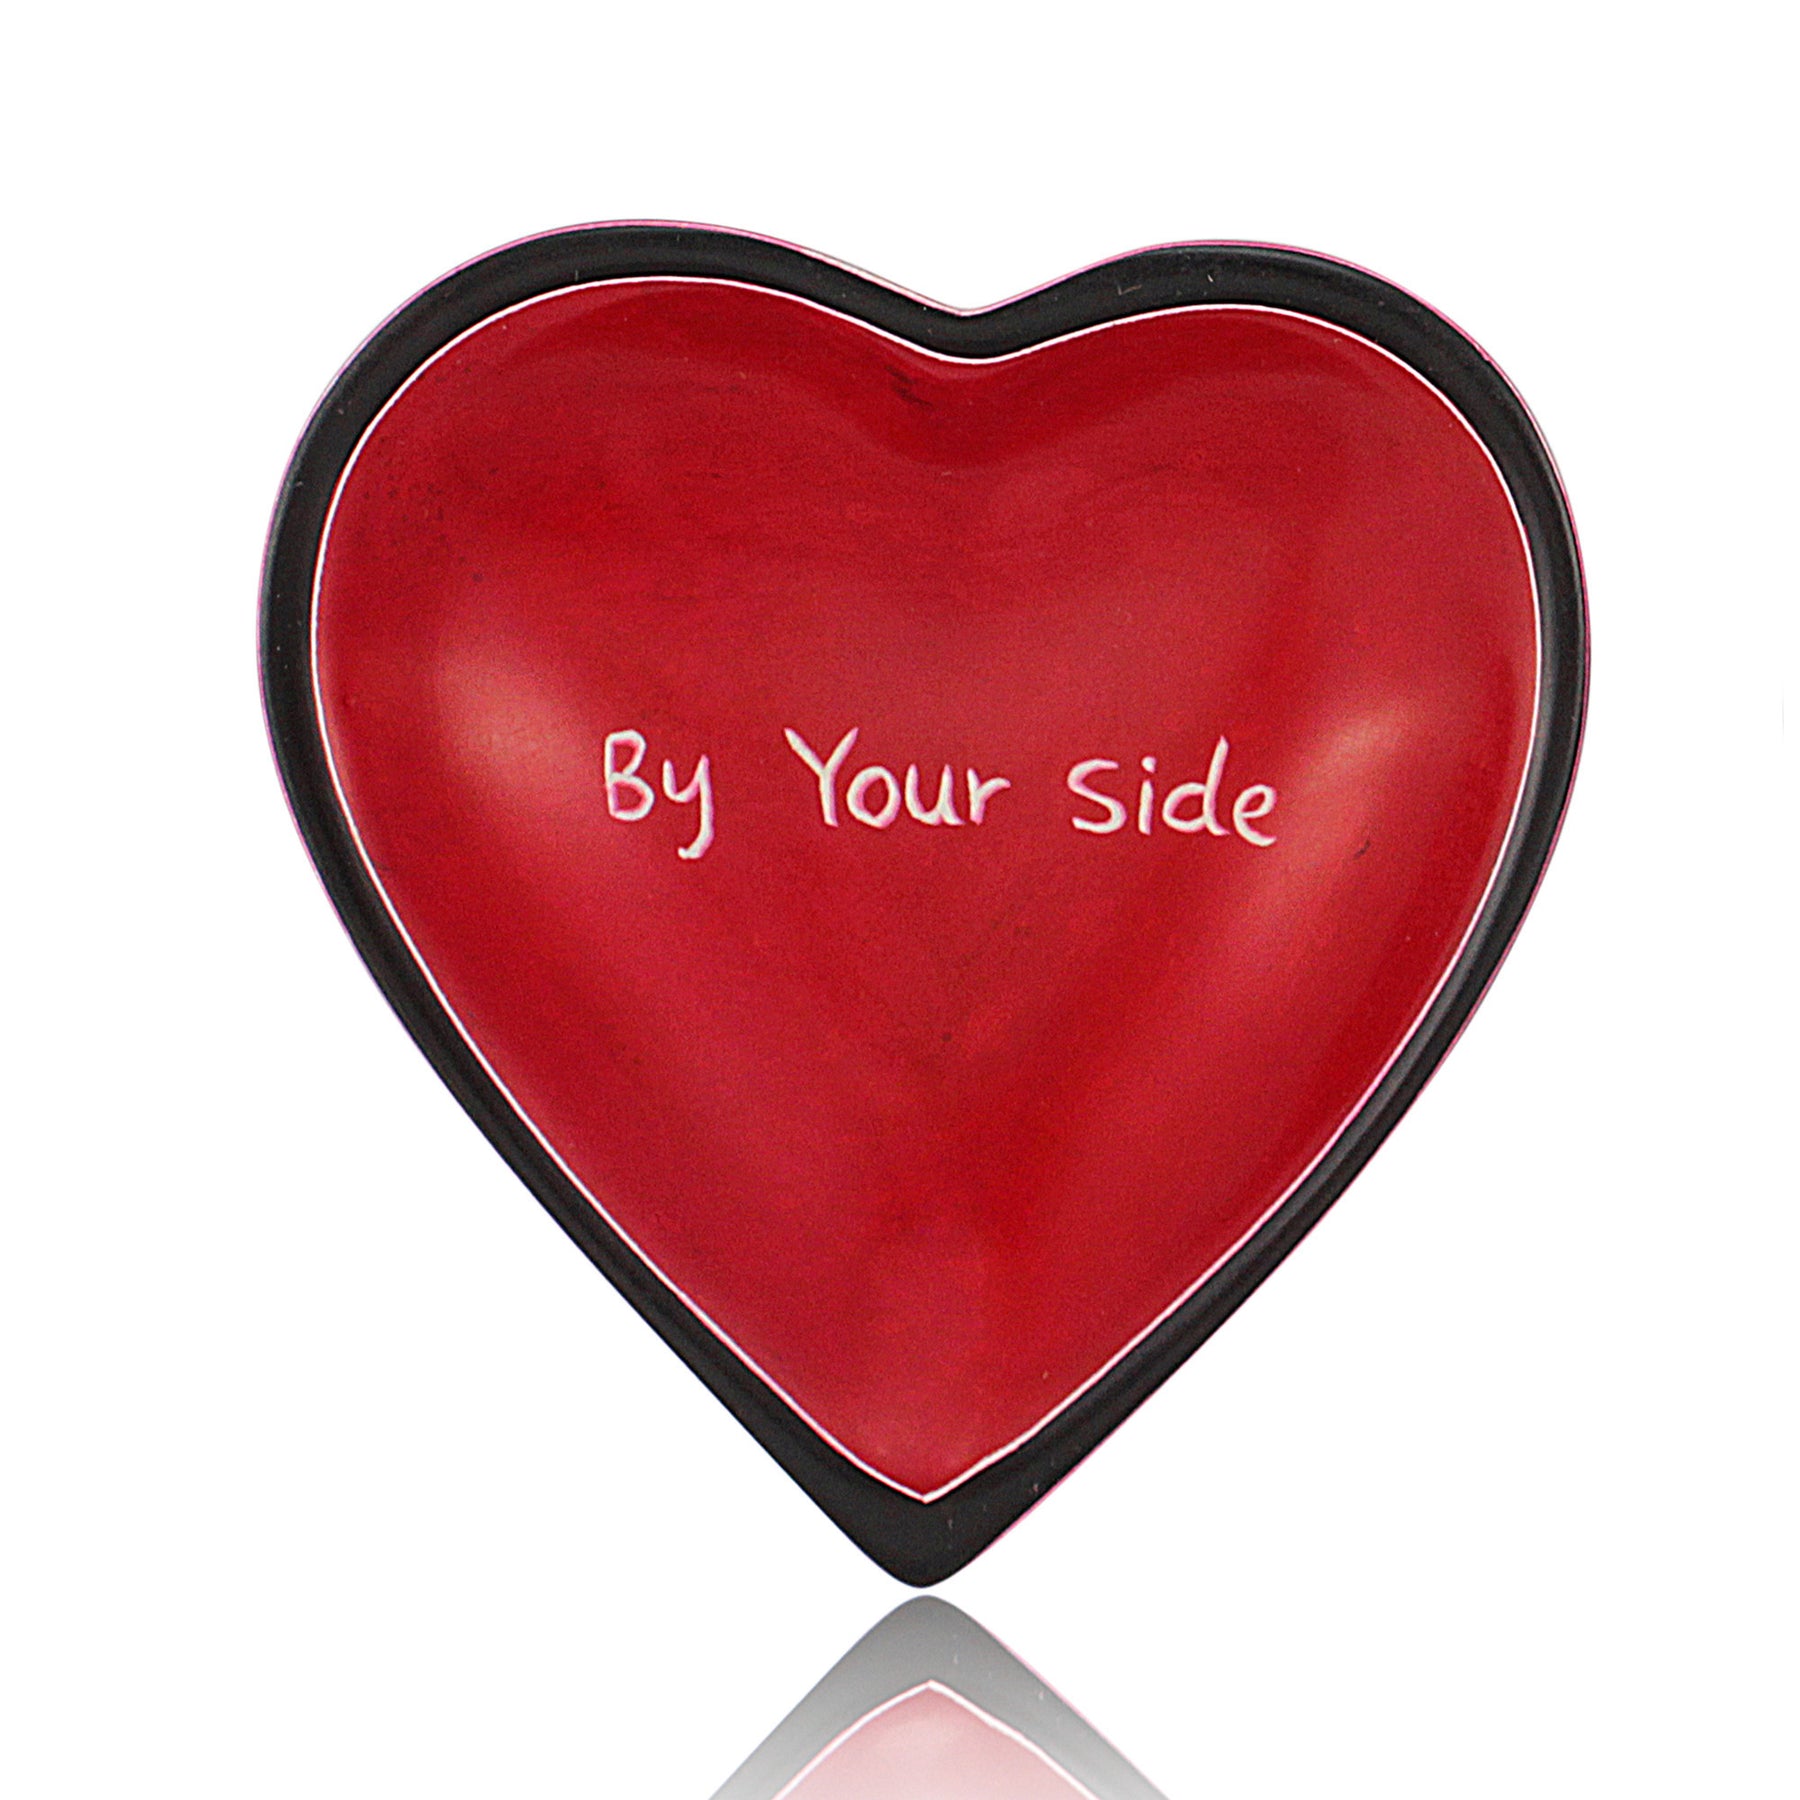 1 of 2: By Your Side Heart Shaped Soap Stone Dish by Venture Imports